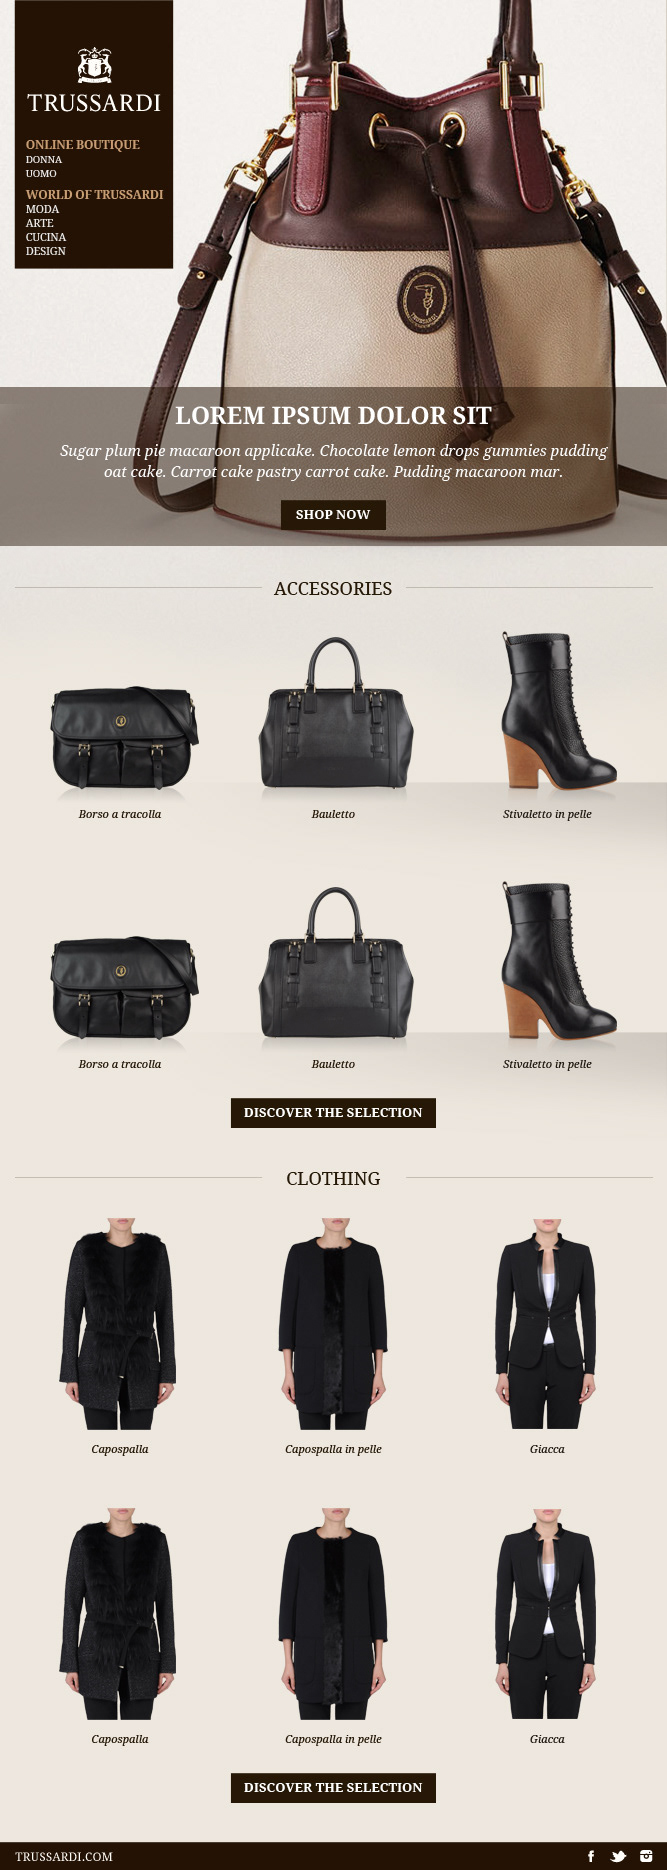 Trussardi template newsletter shop online store Items product ADV campaign sale